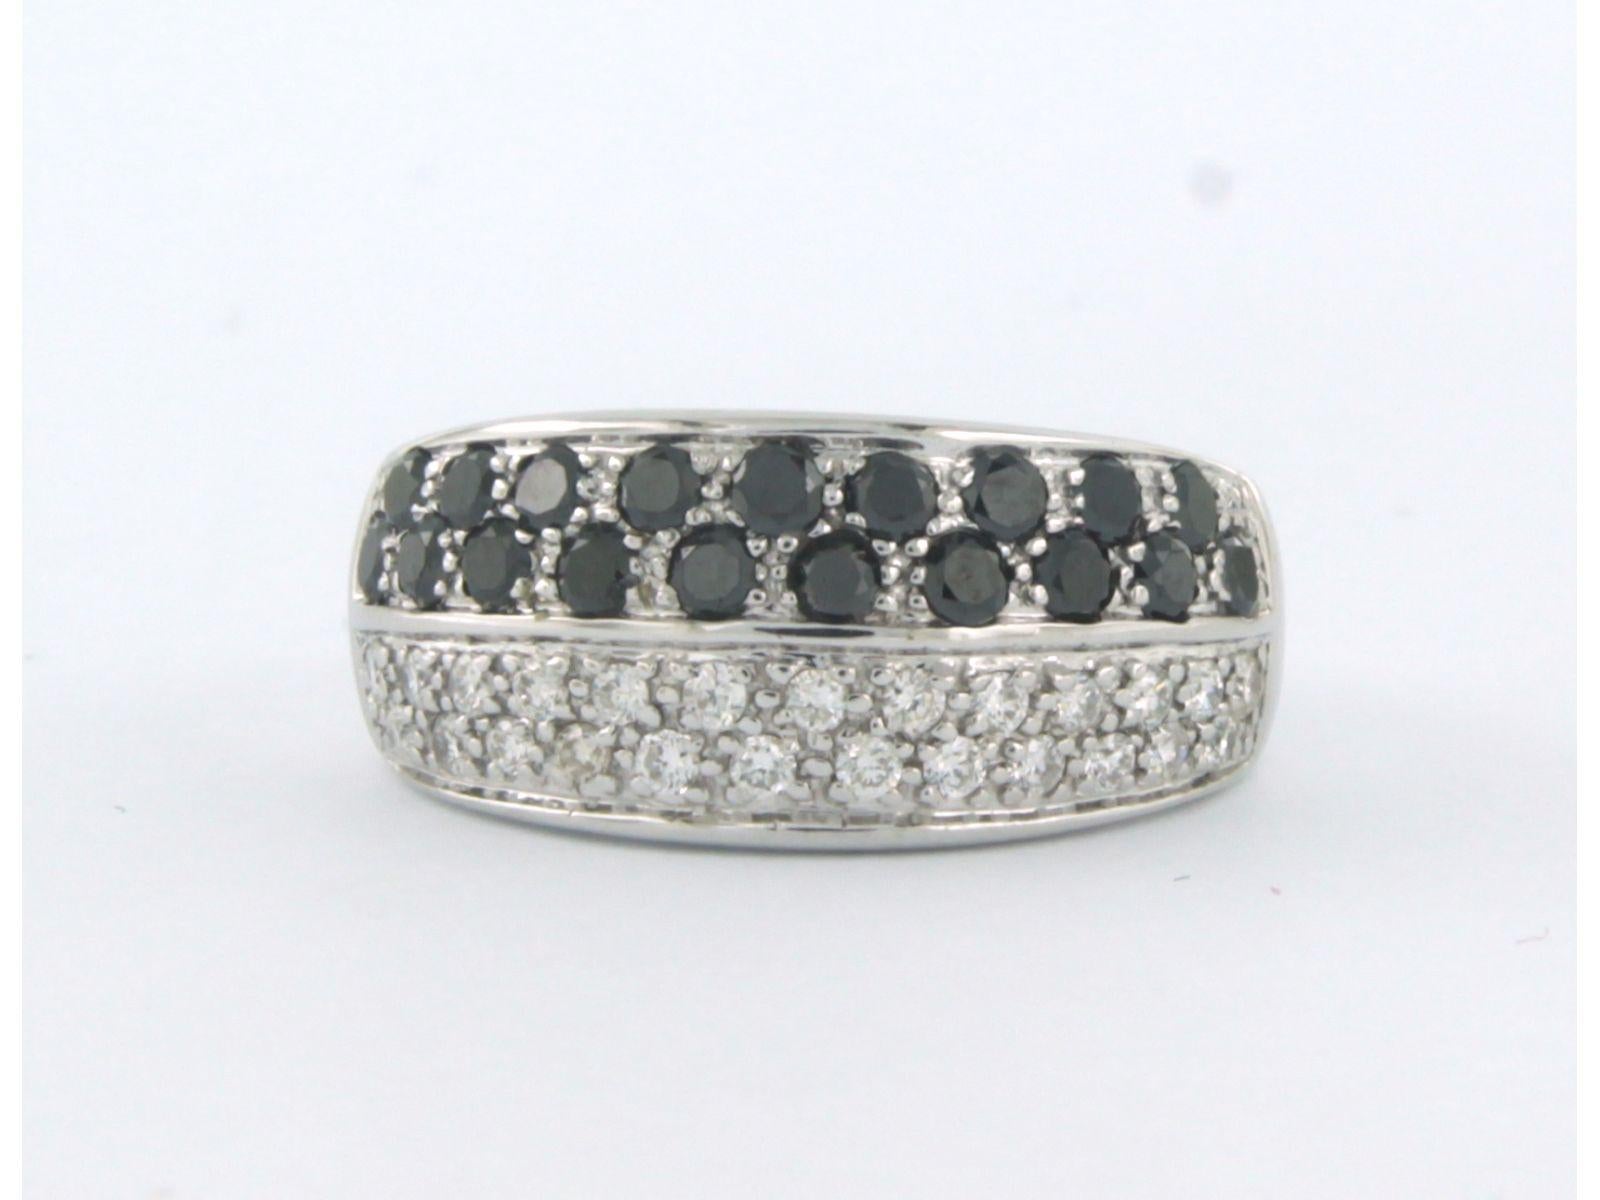 18k white gold ring set with black and white brilliant cut diamonds. 1.00ct - F/G - VS/SI - ring size U.S. 7 - EU. 17.25 (54)

detailed description:

the top of the ring is 9.5 mm wide

weight 3.7 grams

ring size US 7 - EU. 17.25 (54), ring can be